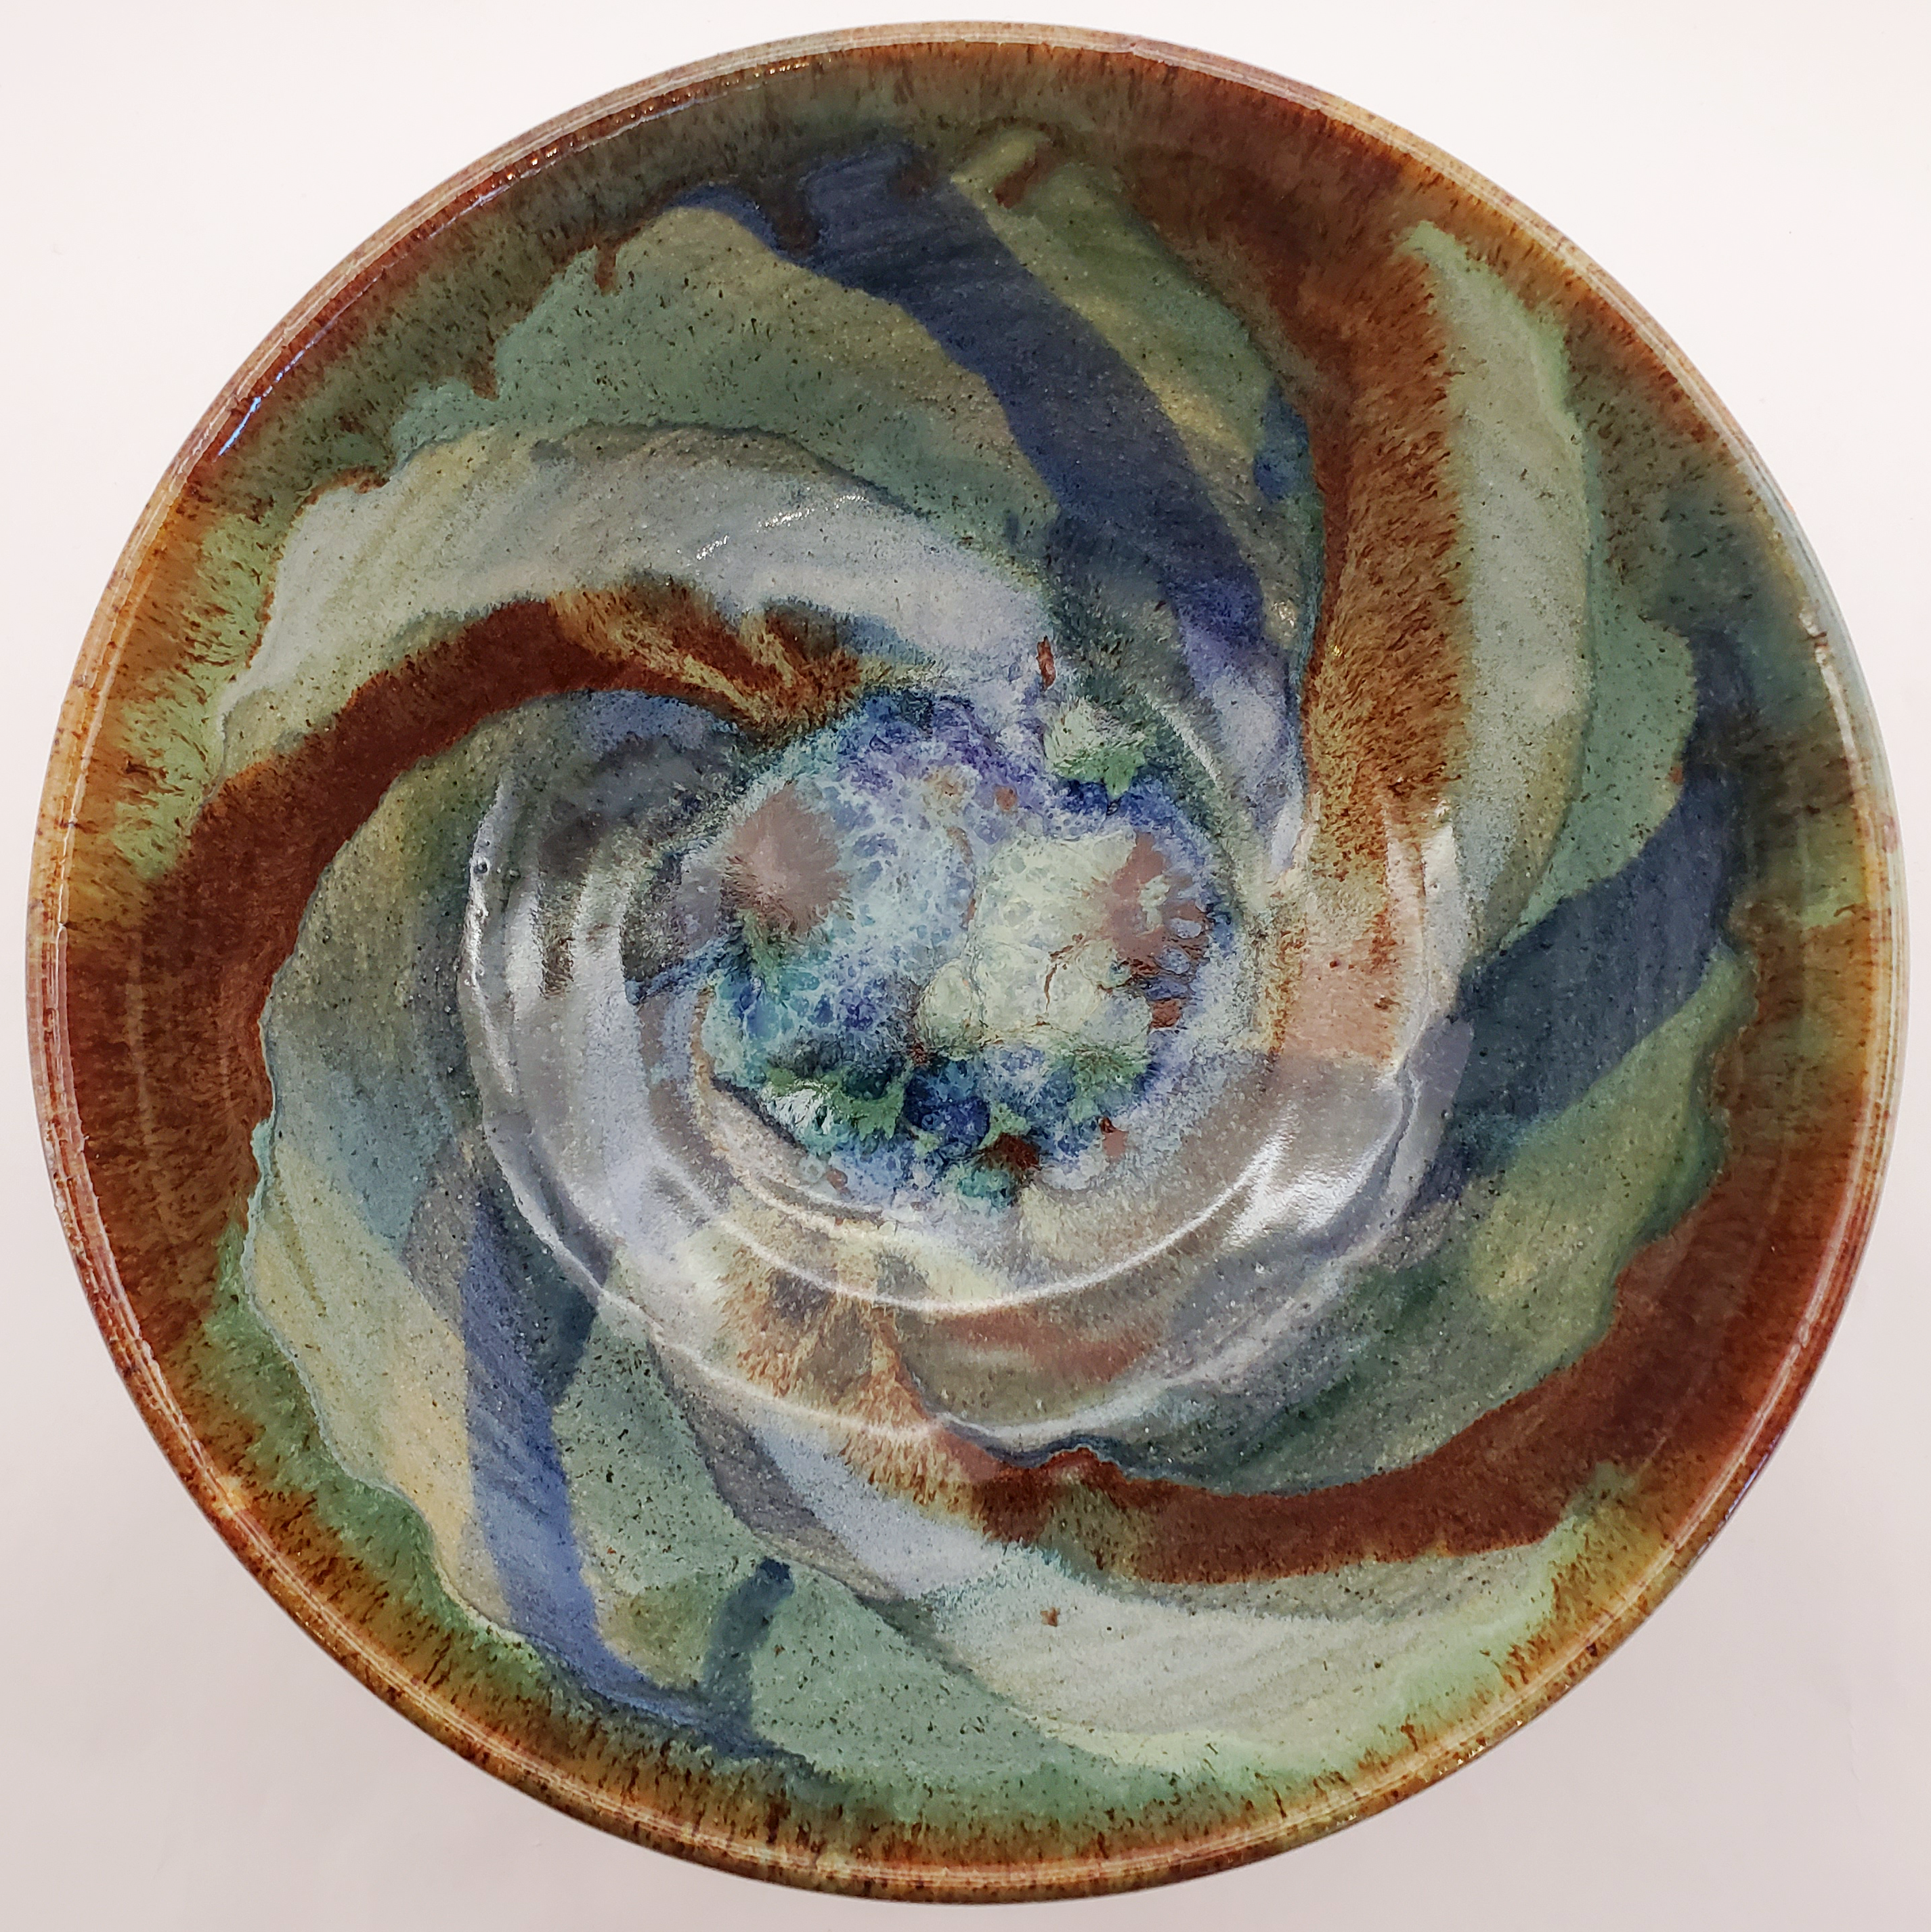 Beautiful bowls glazed with a galaxy swirl in blues, greens, yellows, browns, and reds. Handmade on Vashon Island by Abraham McBride Pottery. Local ceramics artist, Seattle Washington.